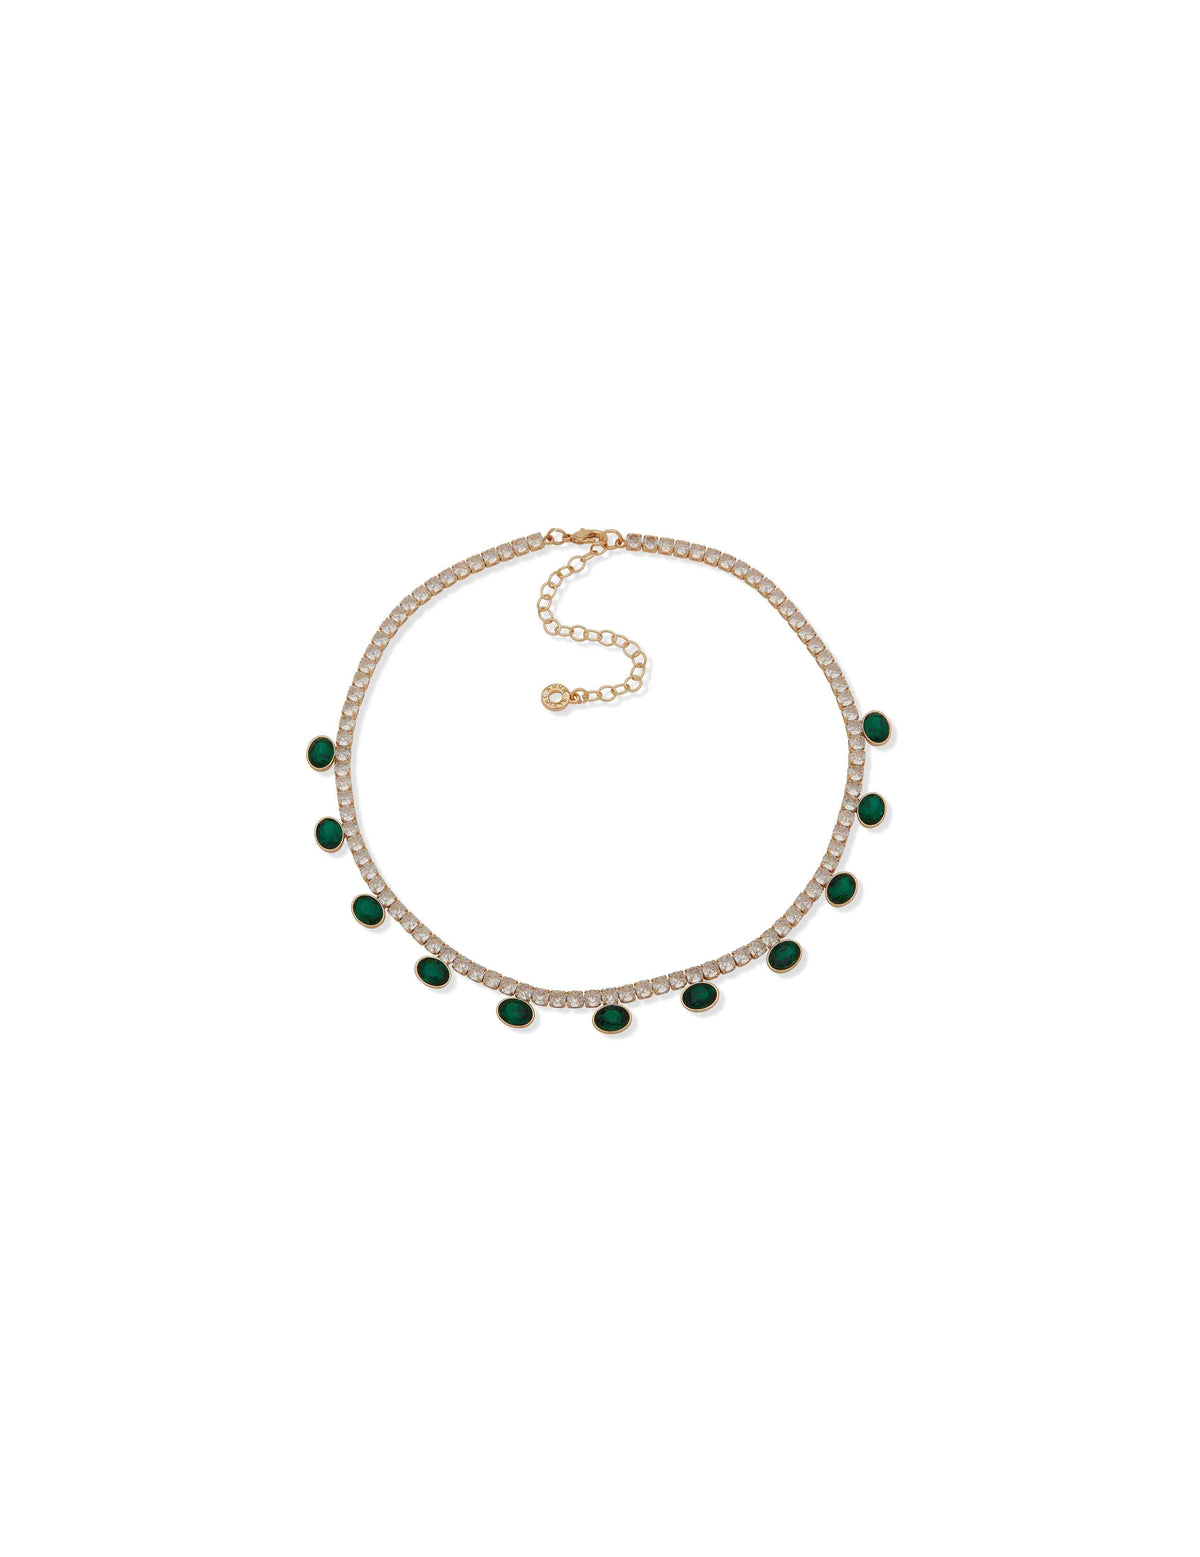 Anne Klein Gold Tone Cup Chain Necklace With Emerald Stones